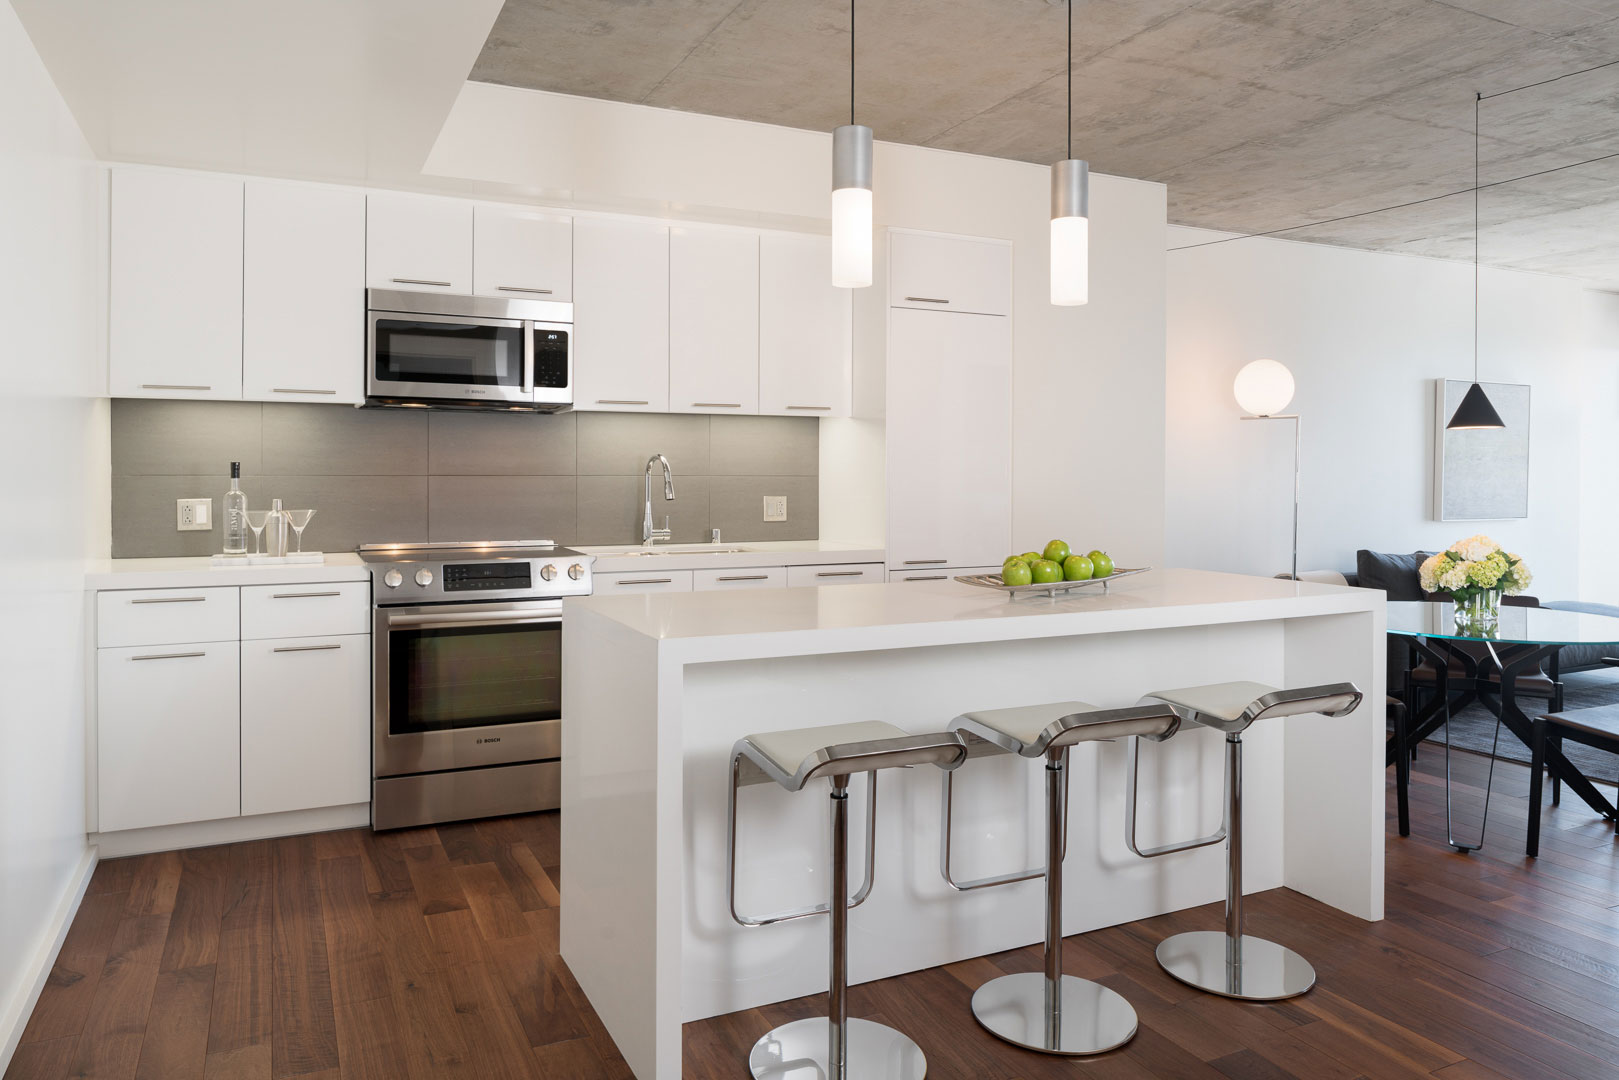 Kitchen with white furnishings, stainless steel appliances, floating island and bar stools